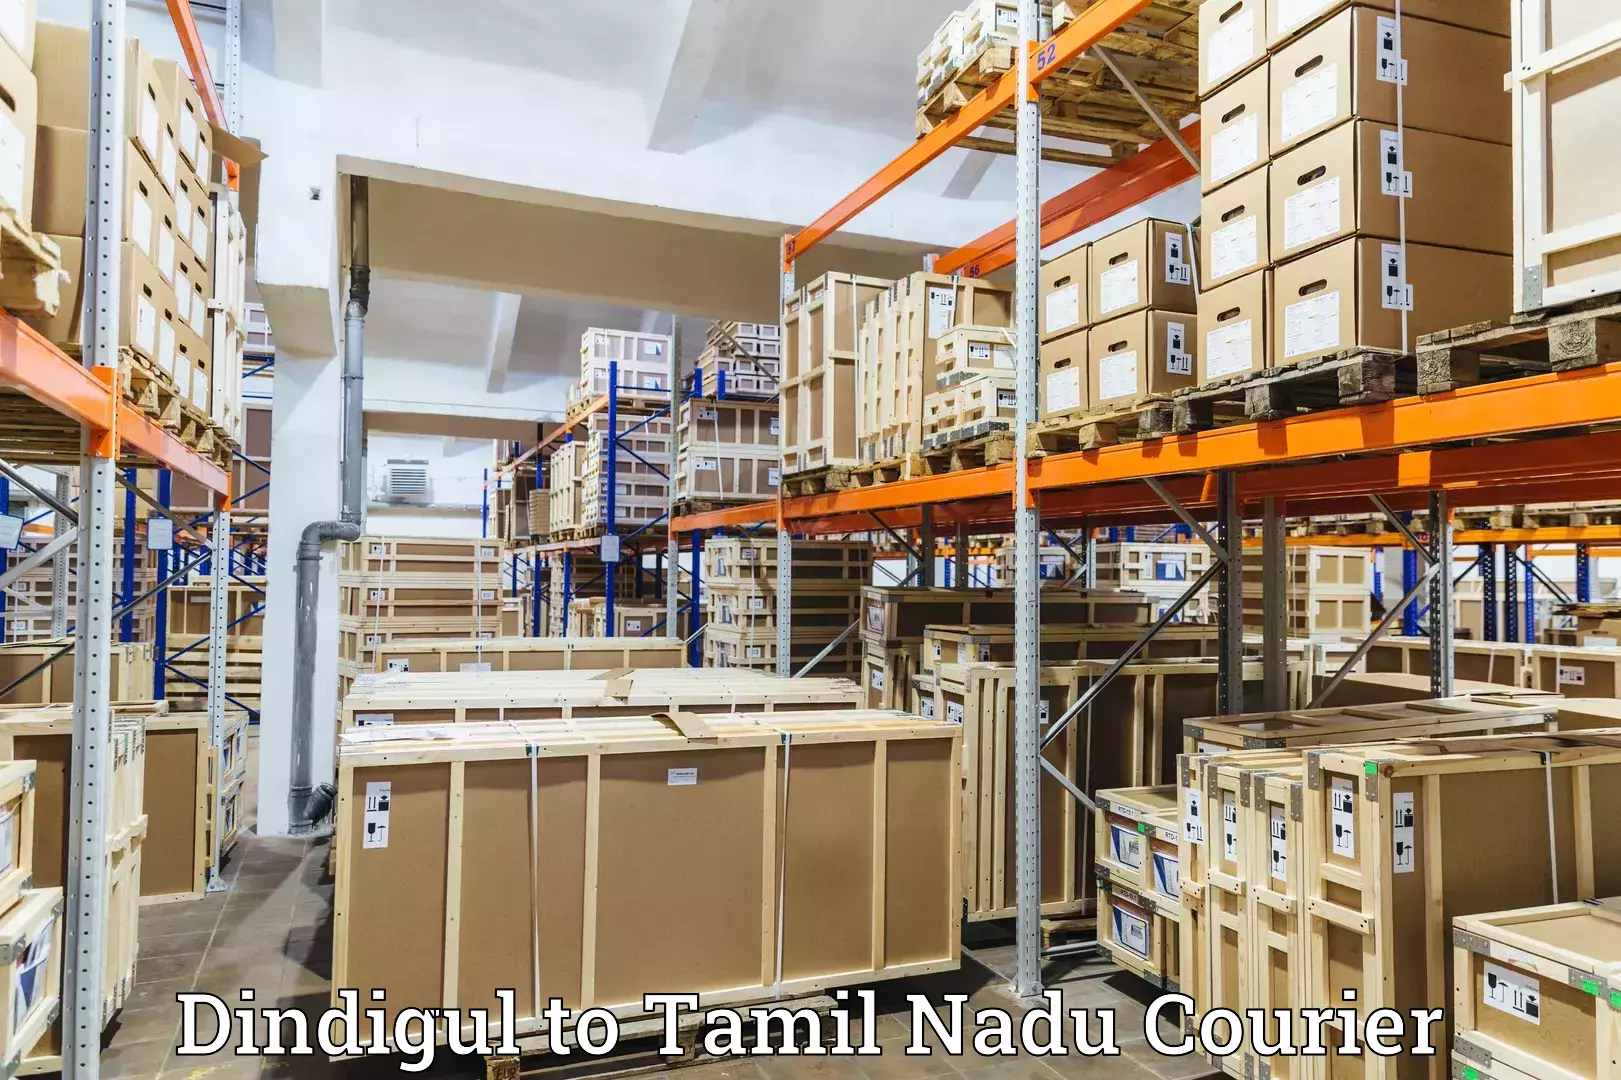 Flexible delivery scheduling Dindigul to Tiruchengode